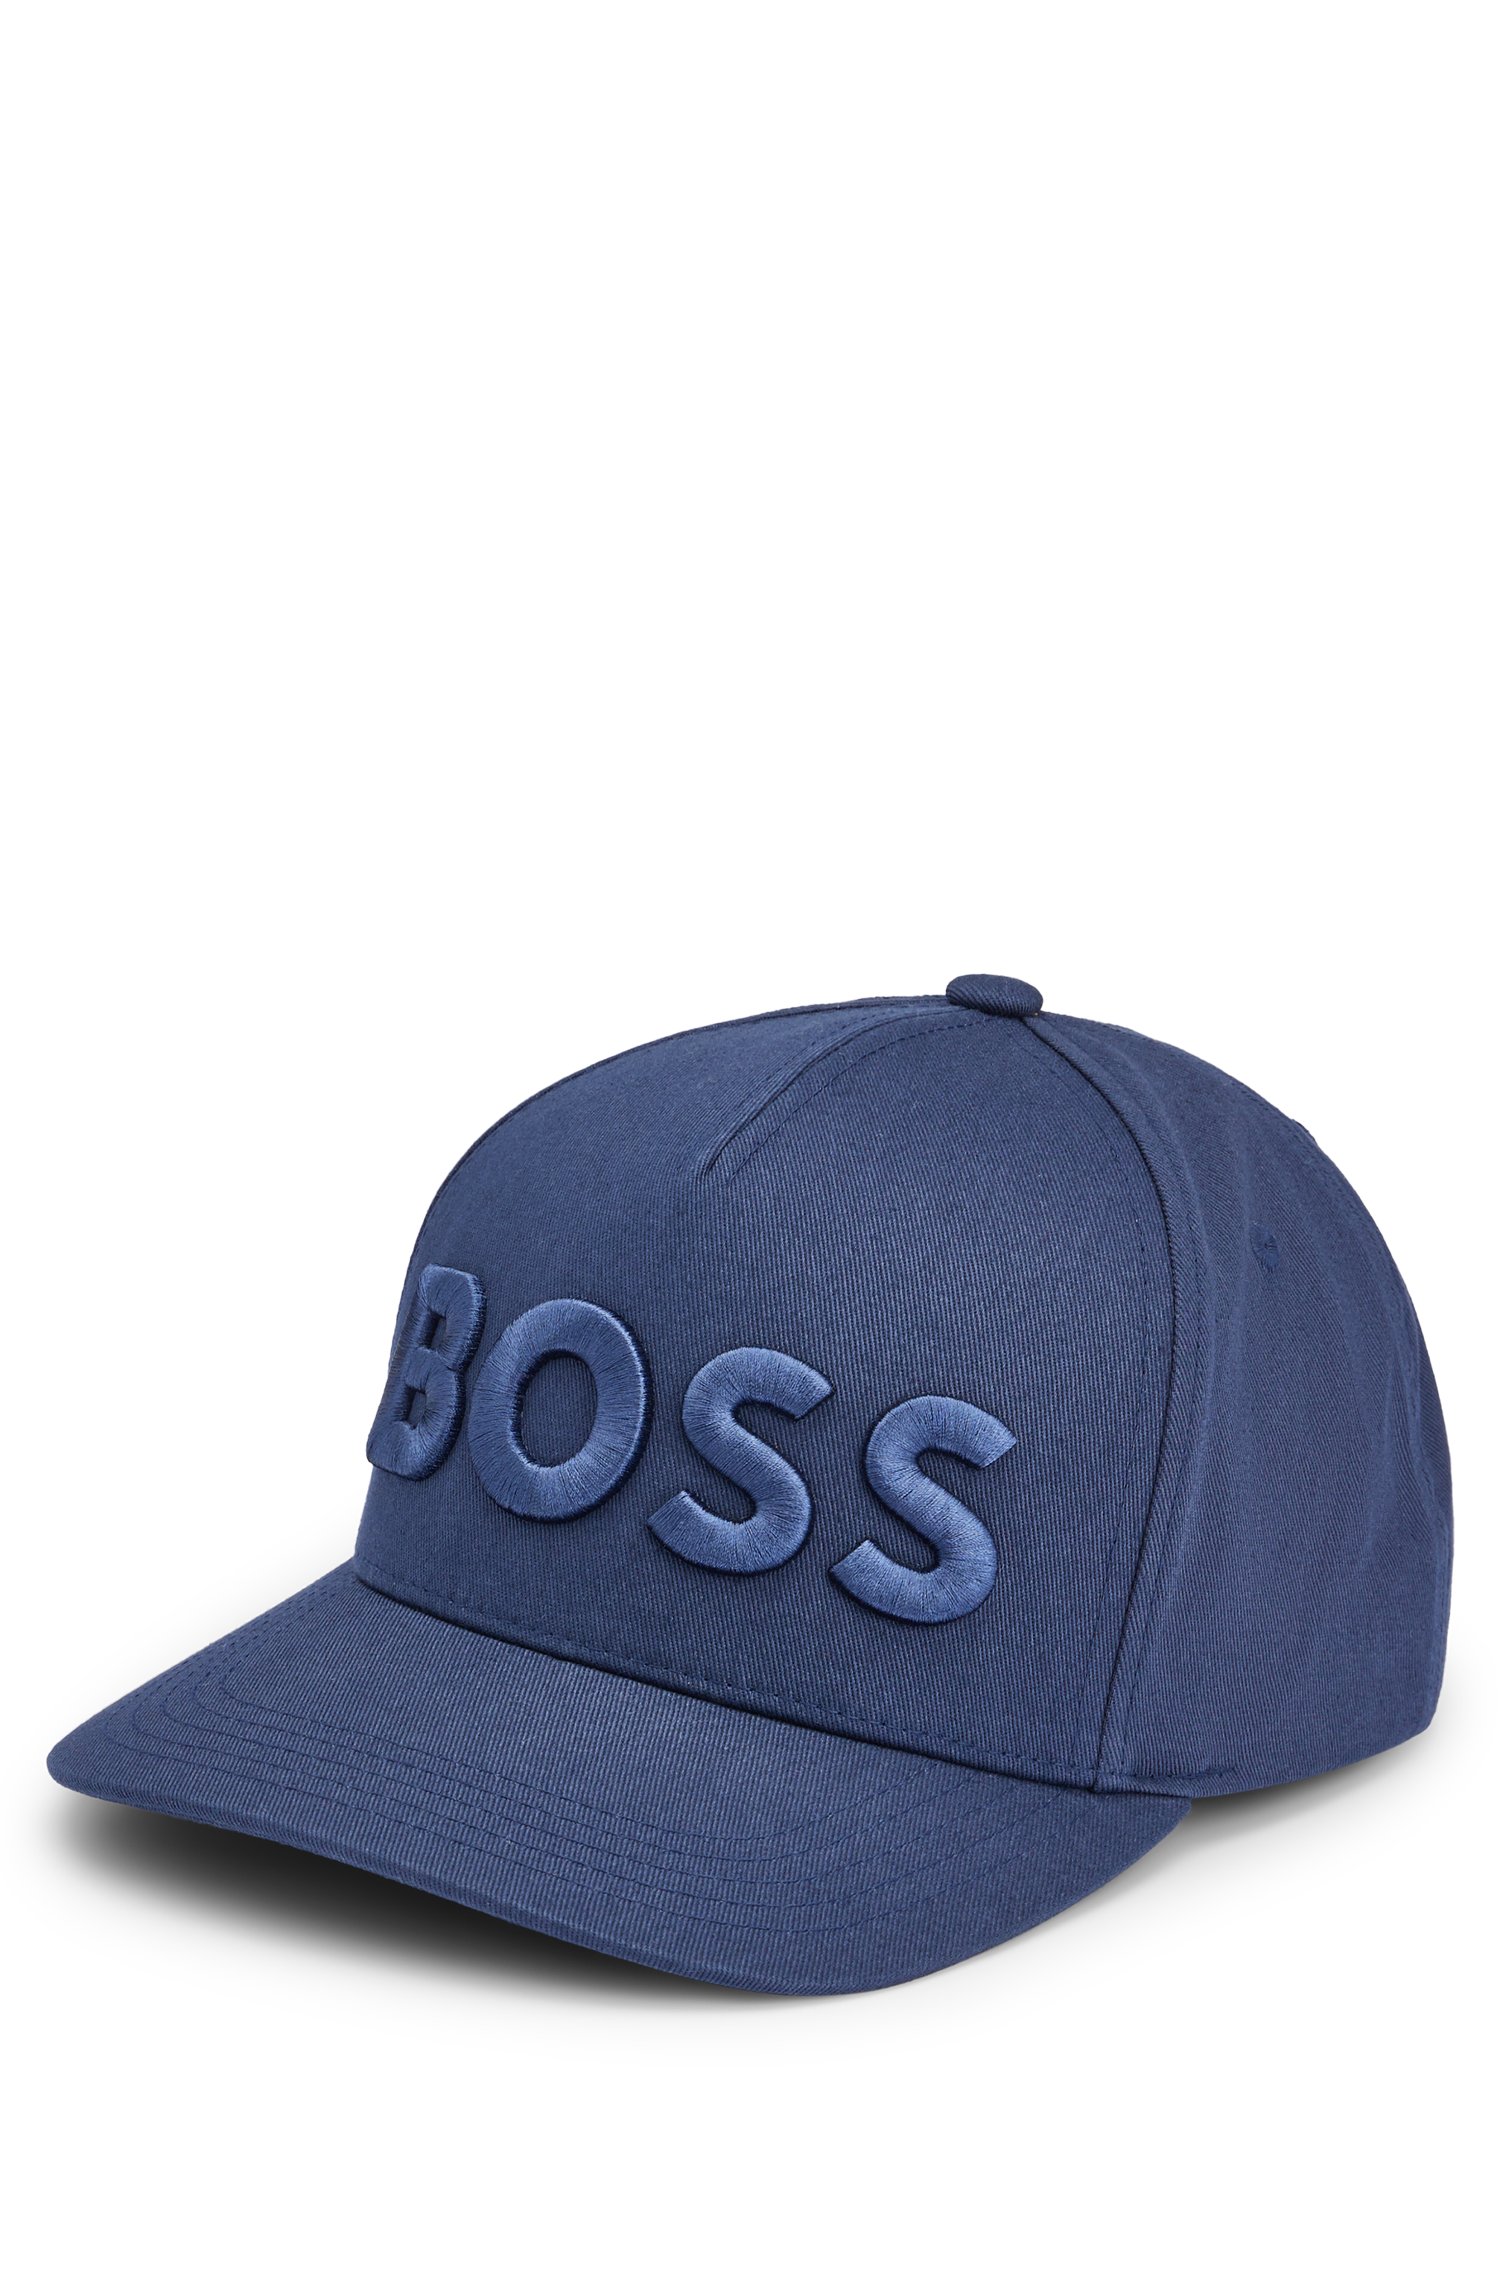 Cotton-twill five-panel cap with embroidered logo